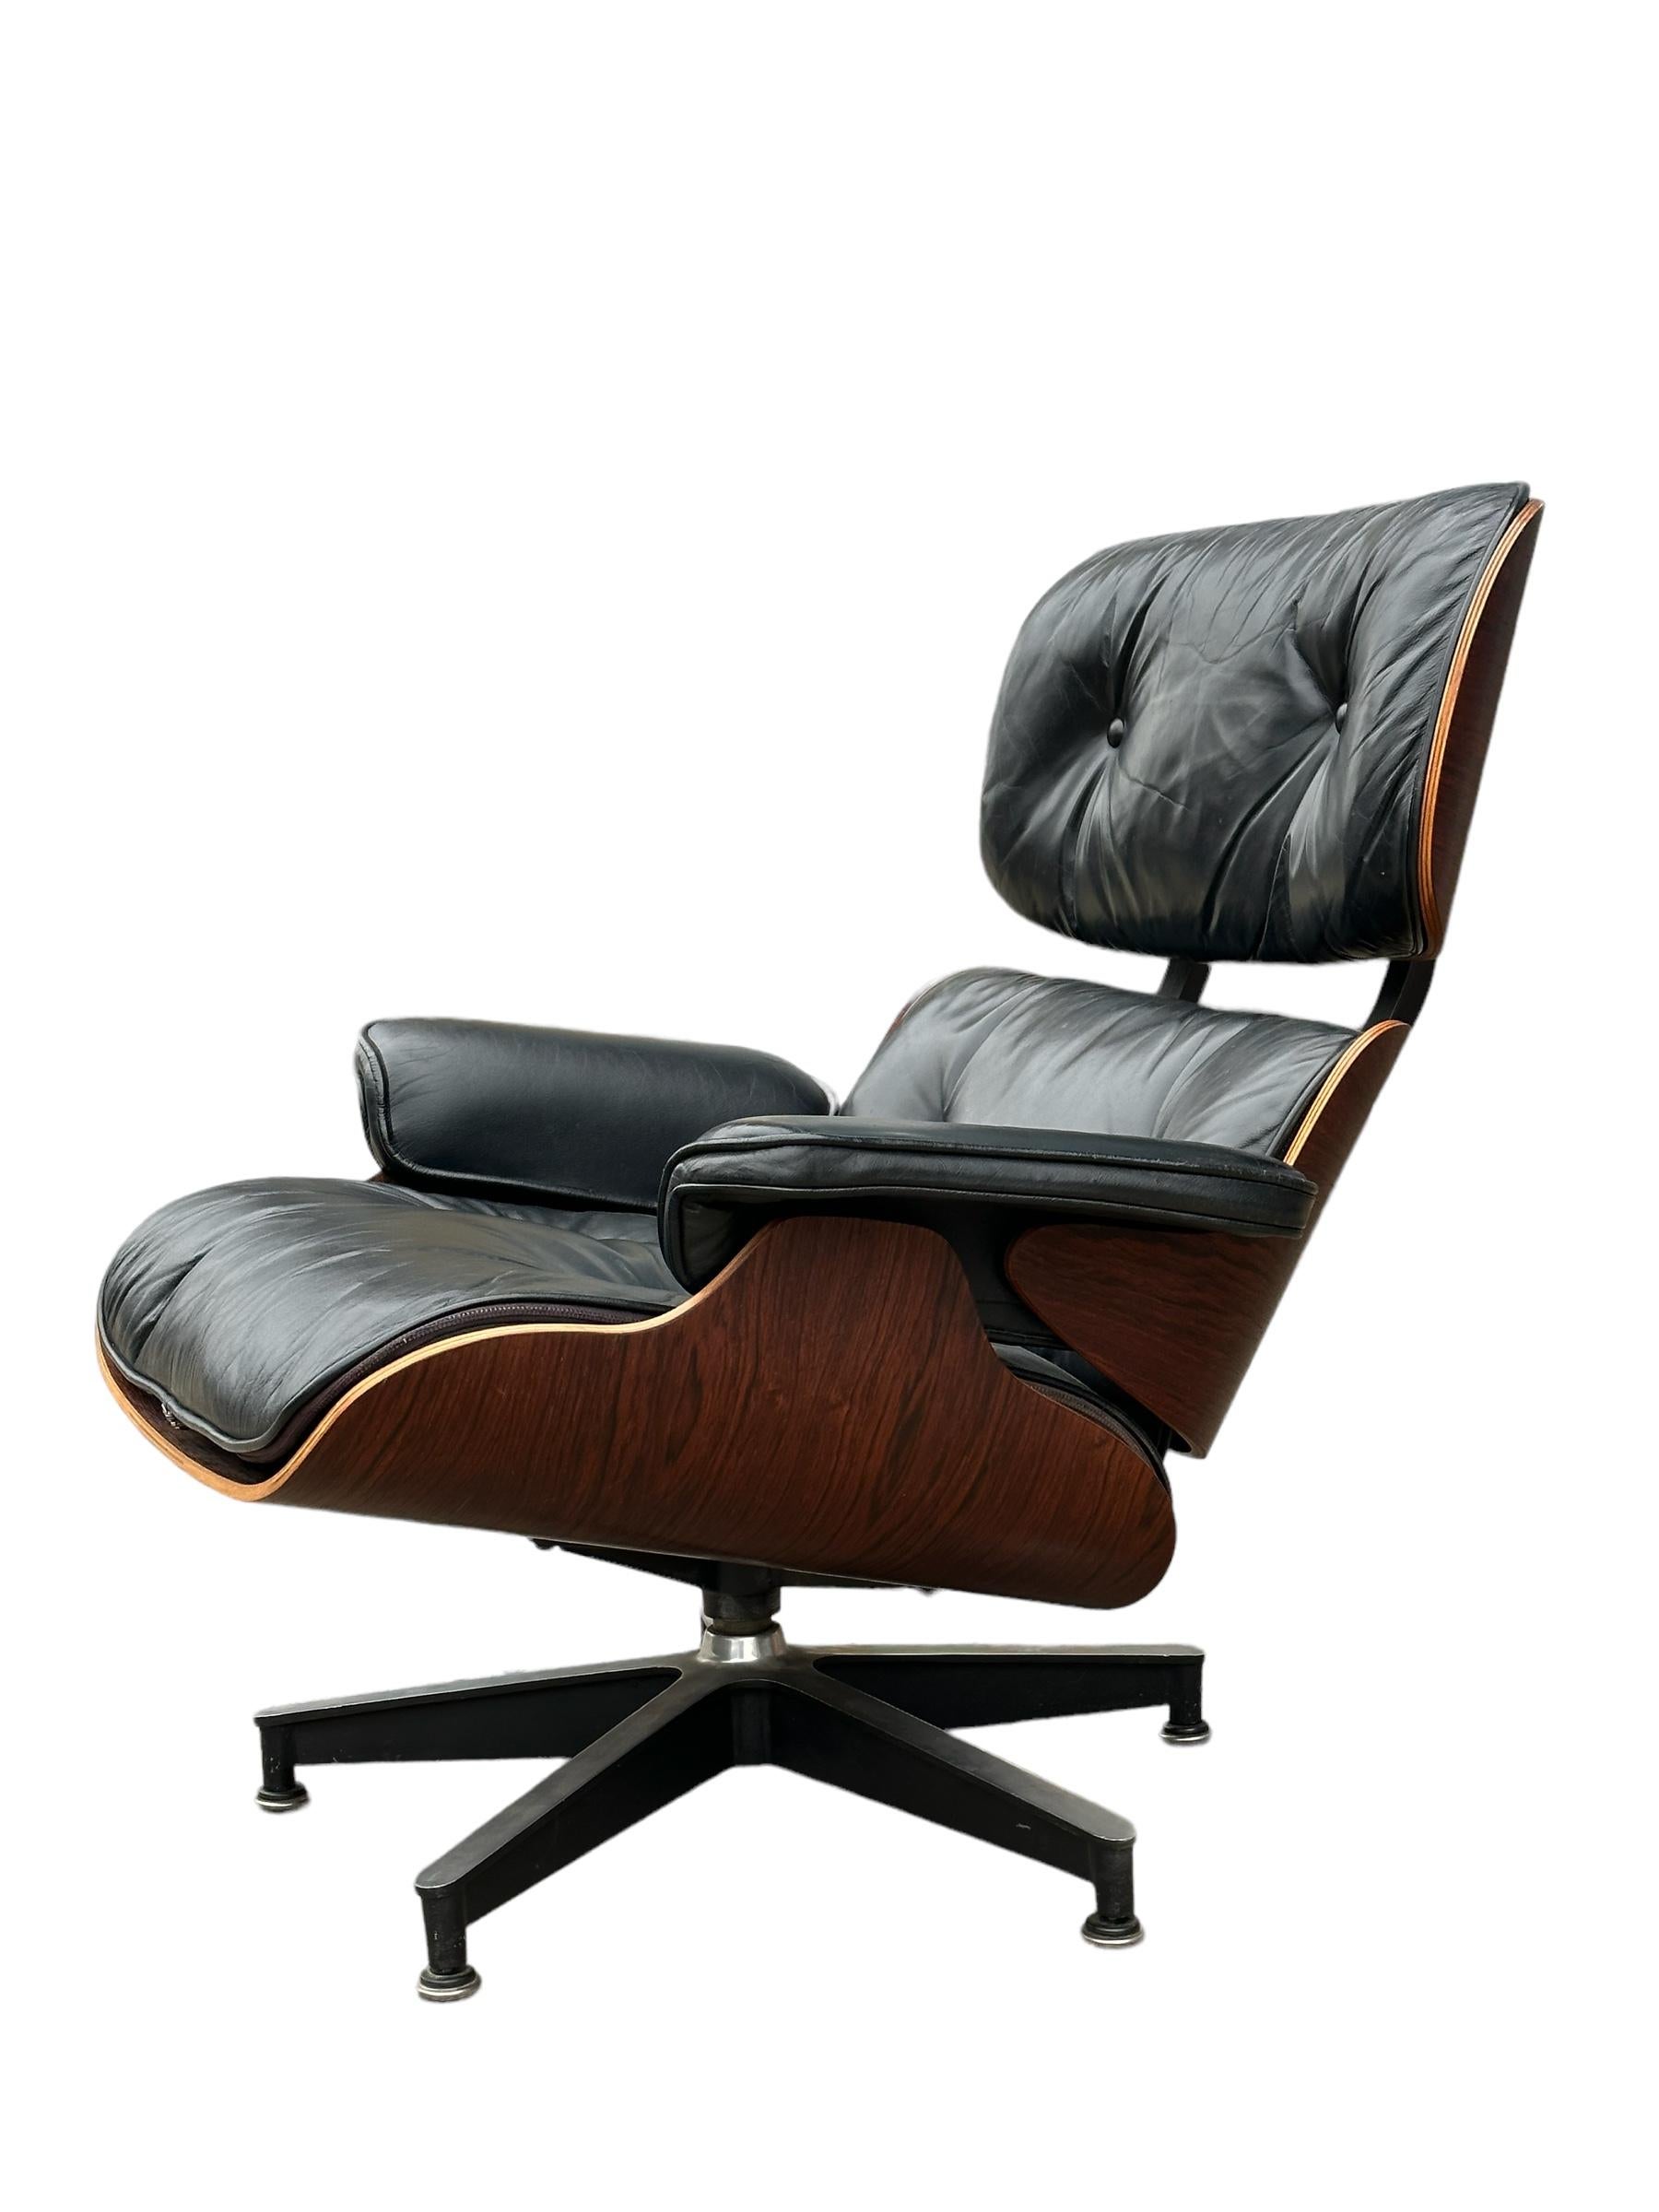 Restored Herman Miller Eames Lounge Chair and Ottoman 1